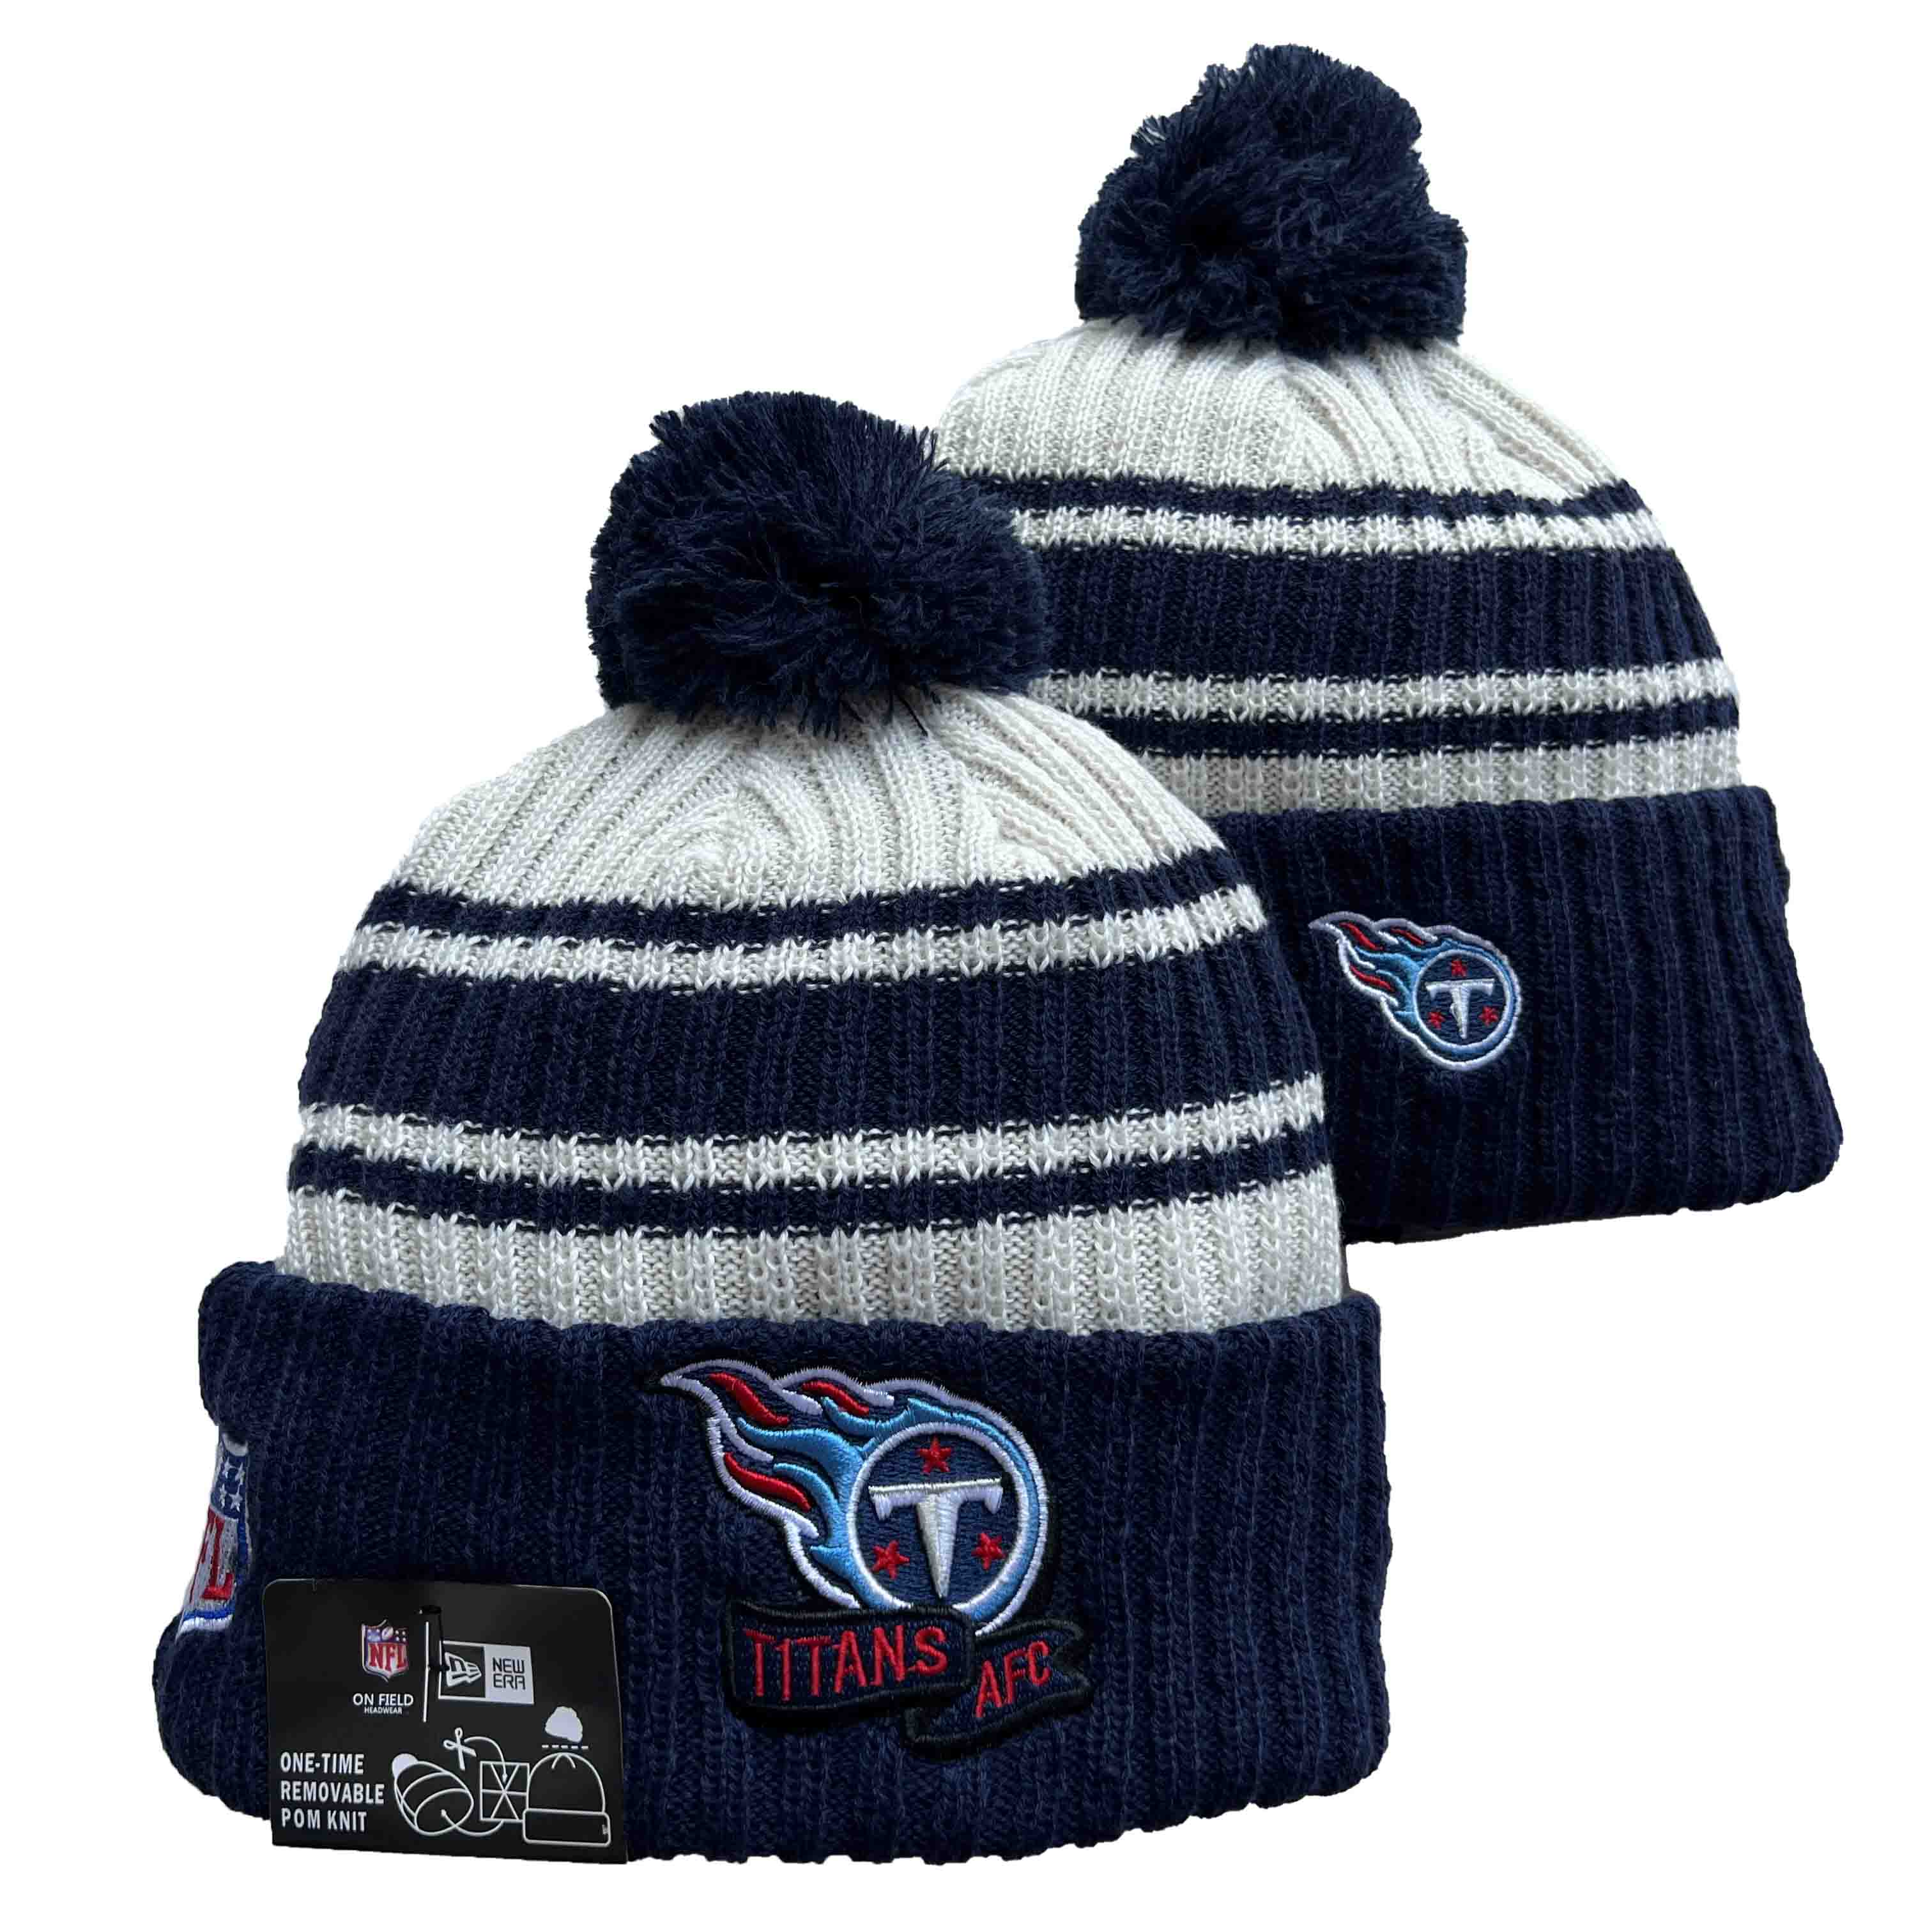 Tennessee Titans Knit Hats -5